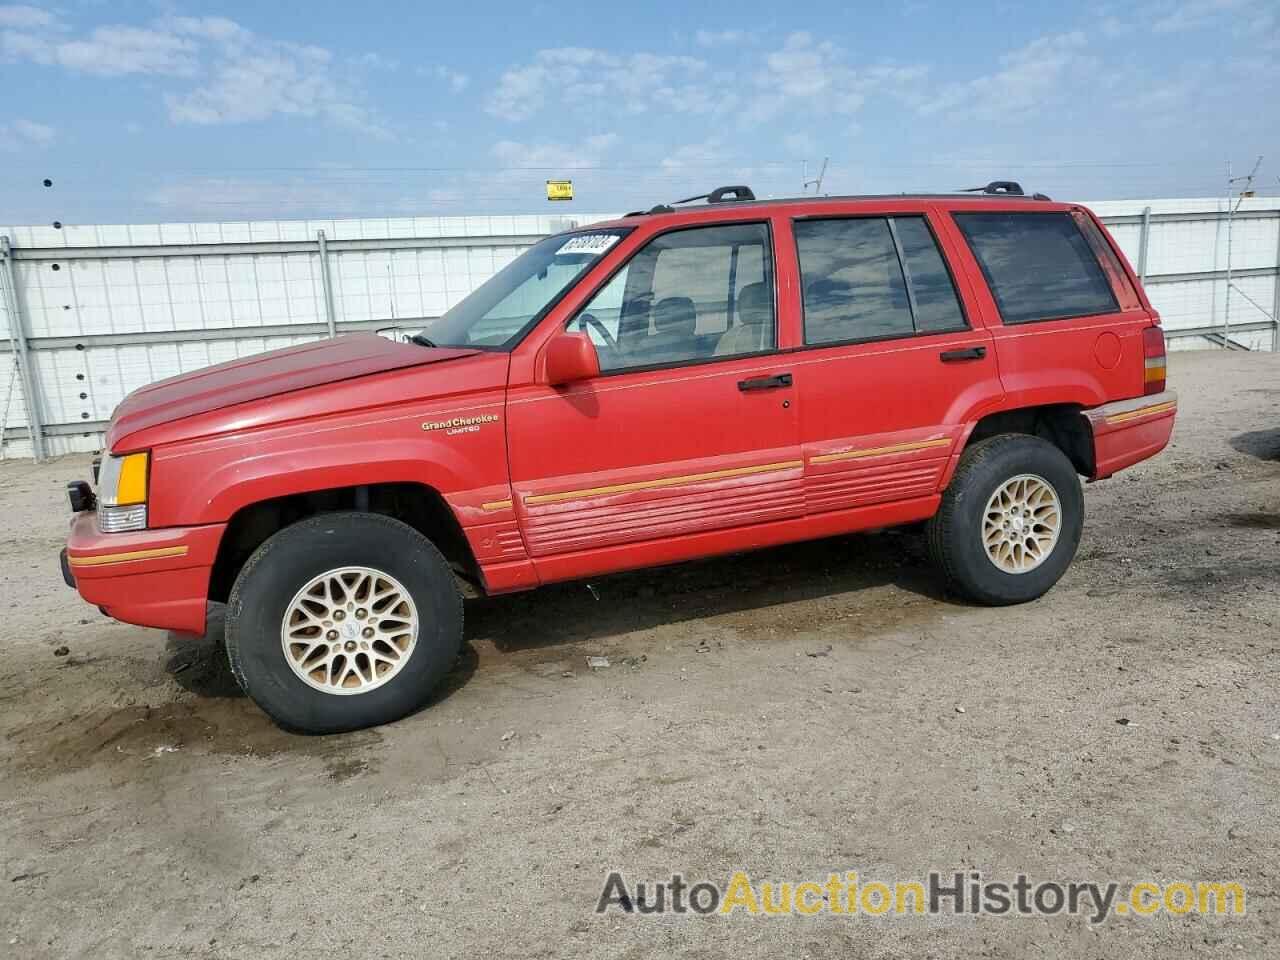 1994 JEEP GRAND CHER LIMITED, 1J4GZ78Y8RC337206